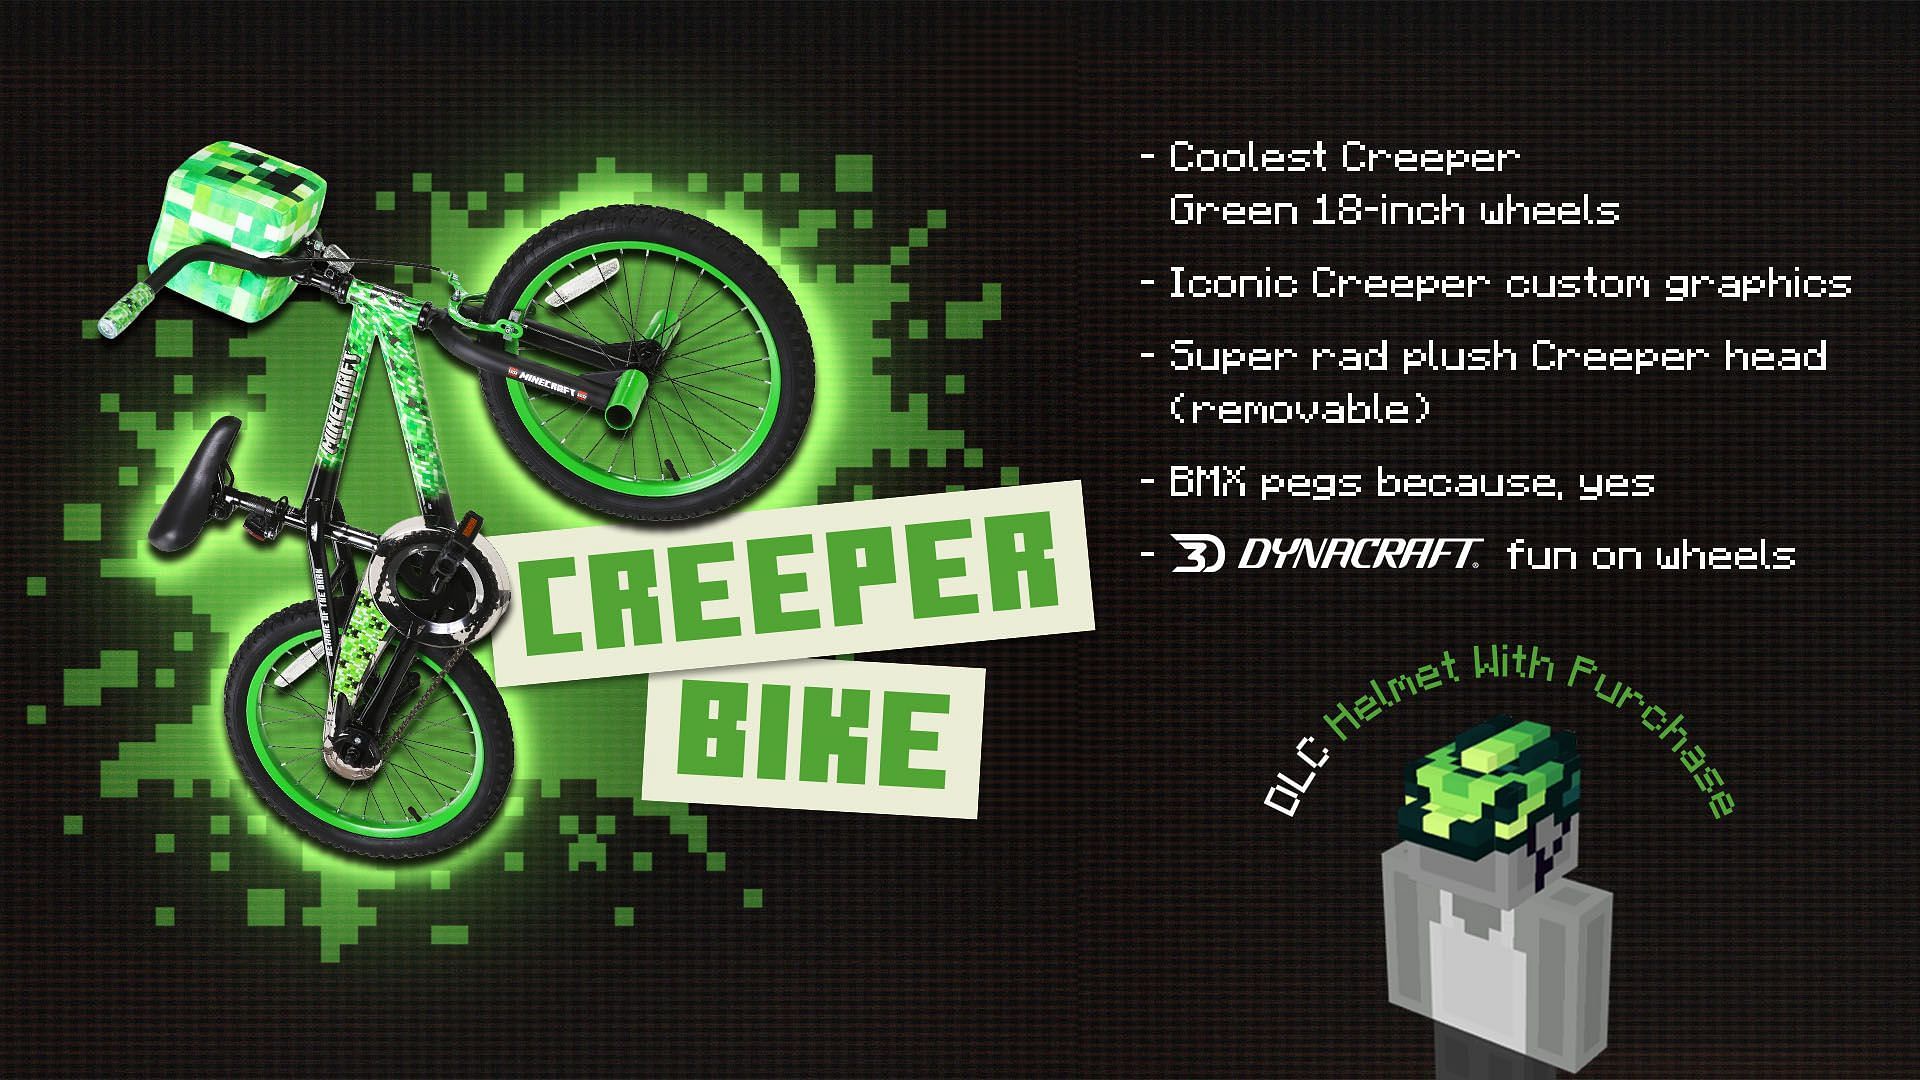 Every creeper bike purchase offers a redeemable code for a helmet cosmetic in Minecraft Bedrock (Image via @Minecraft/X)